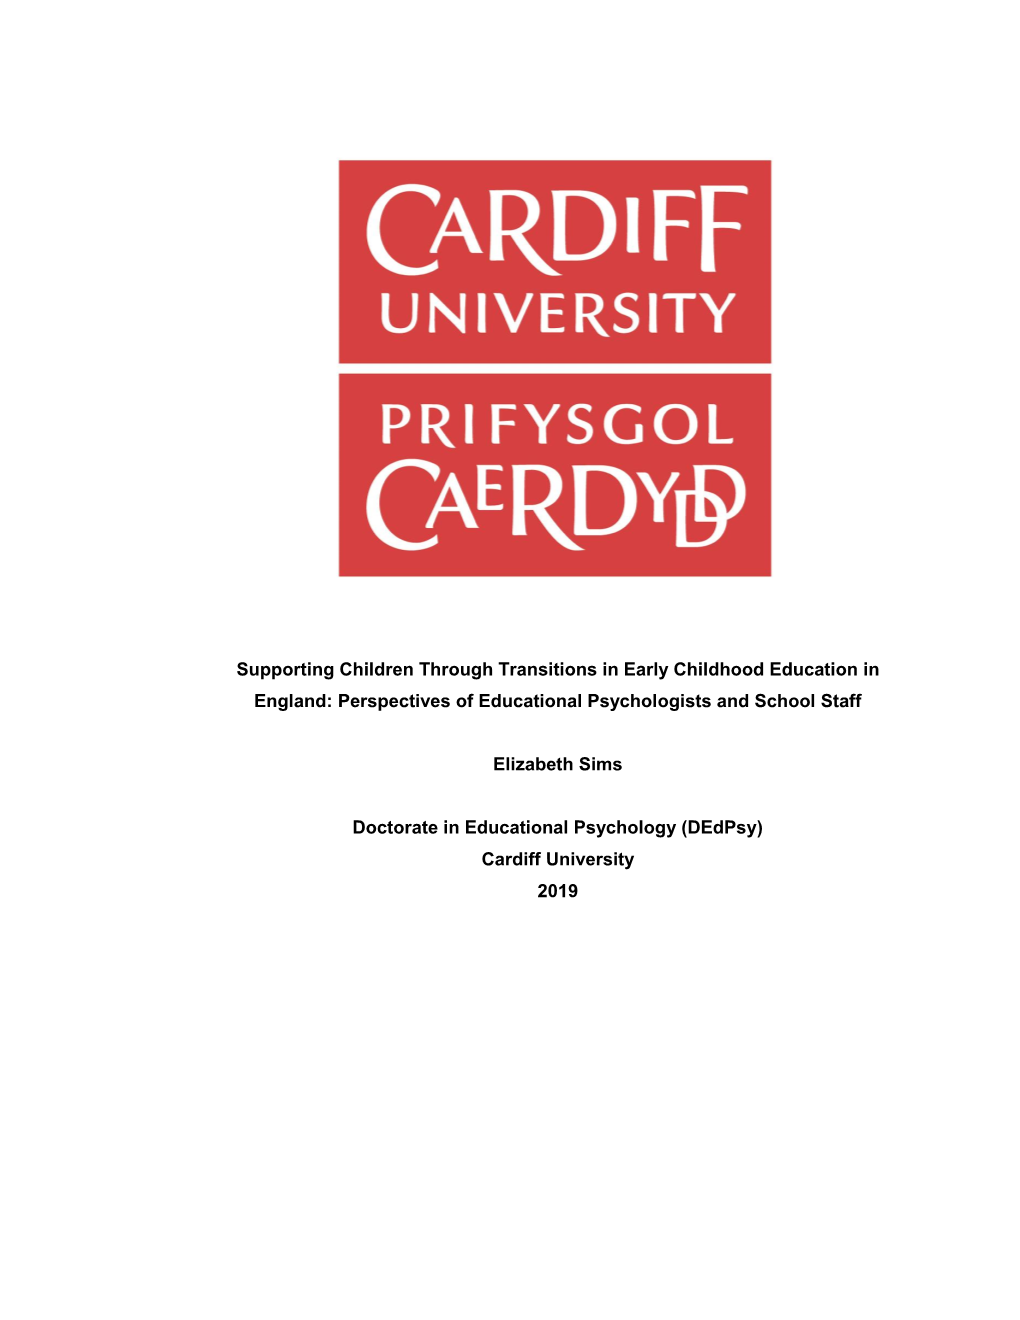 Supporting Children Through Transitions in Early Childhood Education in England: Perspectives of Educational Psychologists and School Staff